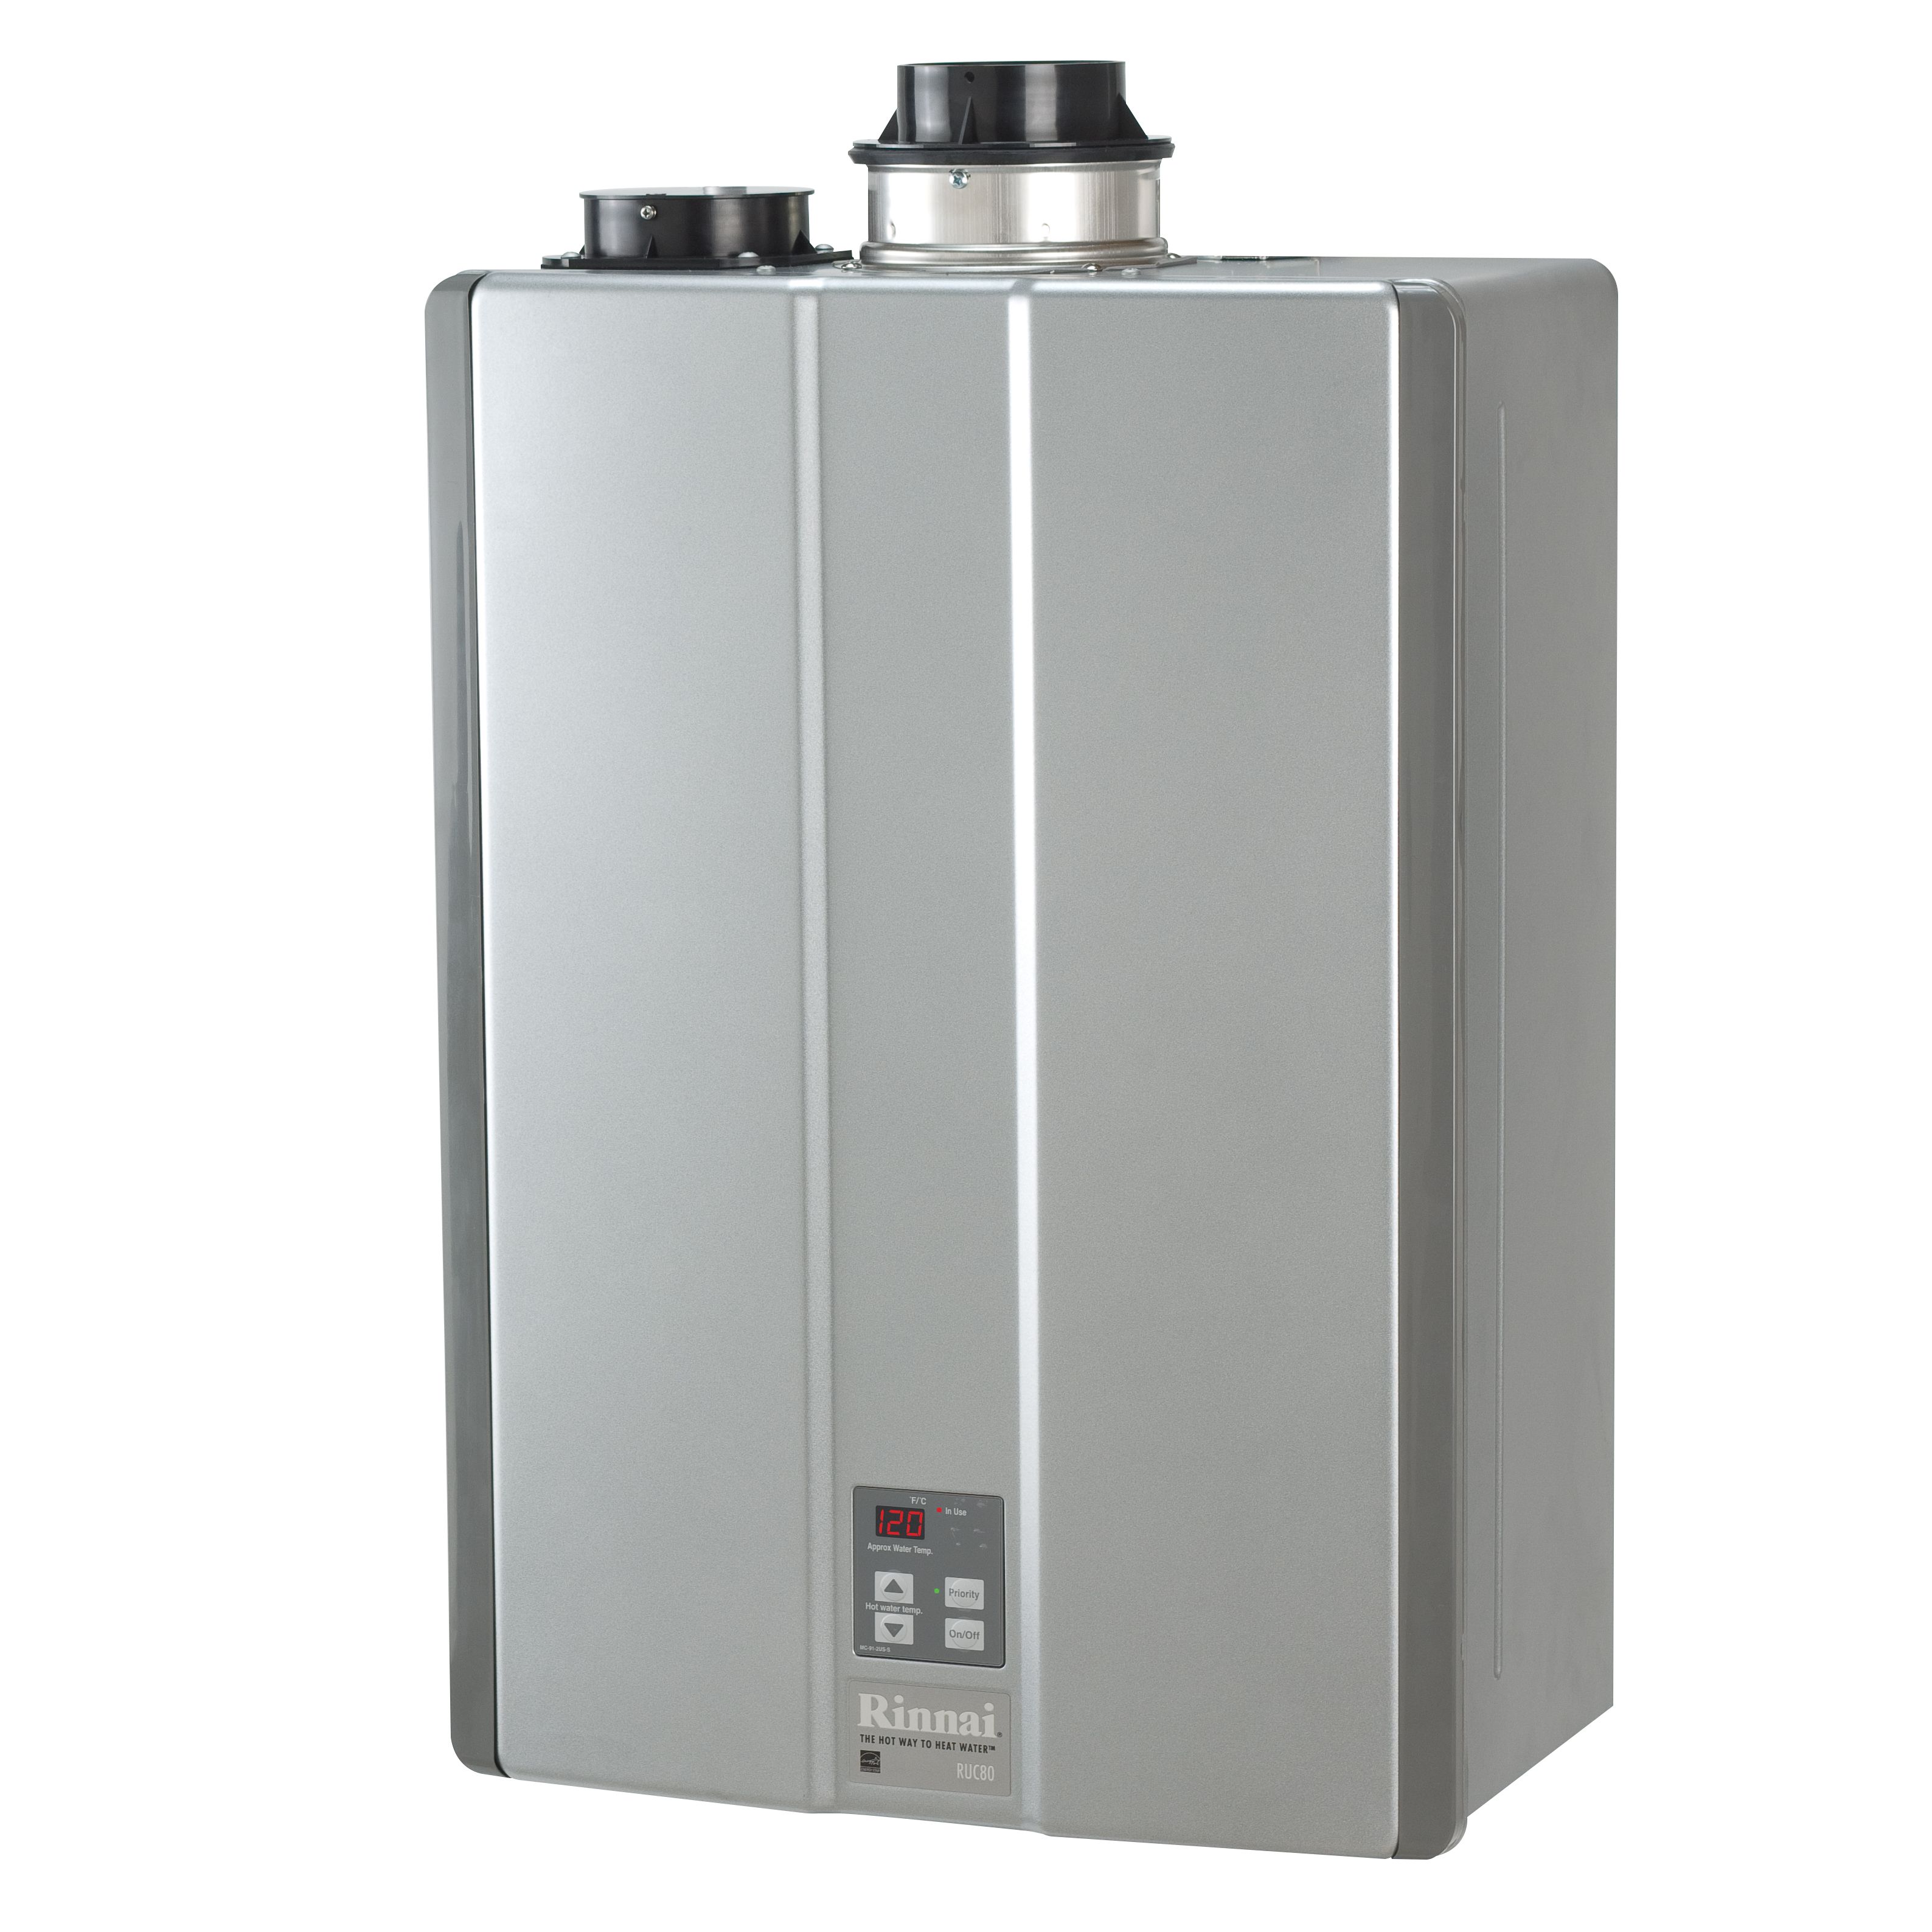 knowtopic-common-types-of-hot-water-heaters